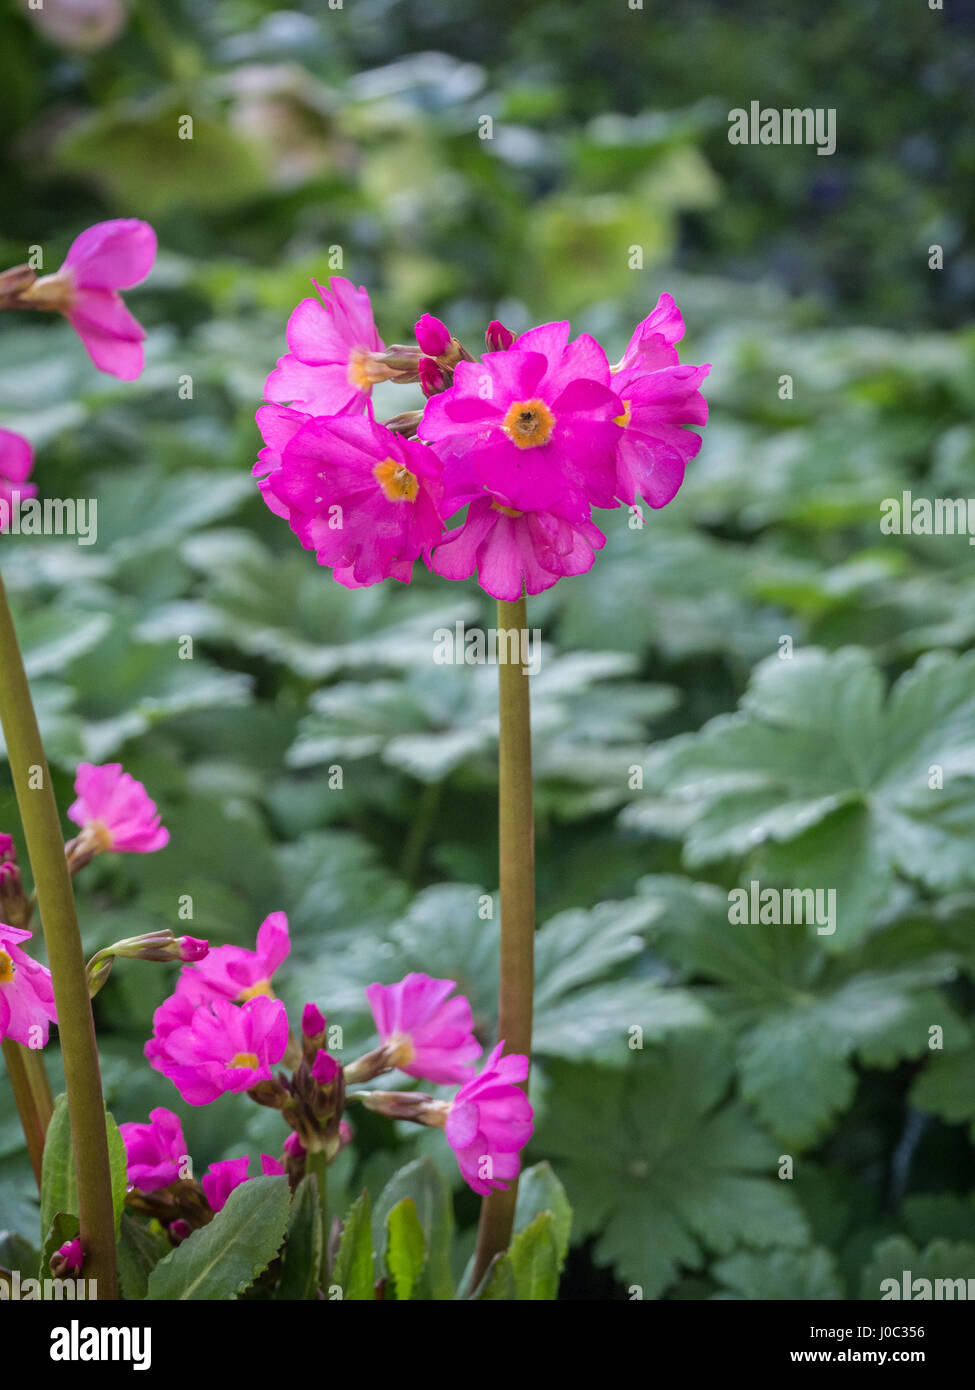 Close up of a single flower head of Primula rosea Gigas Stock Photo